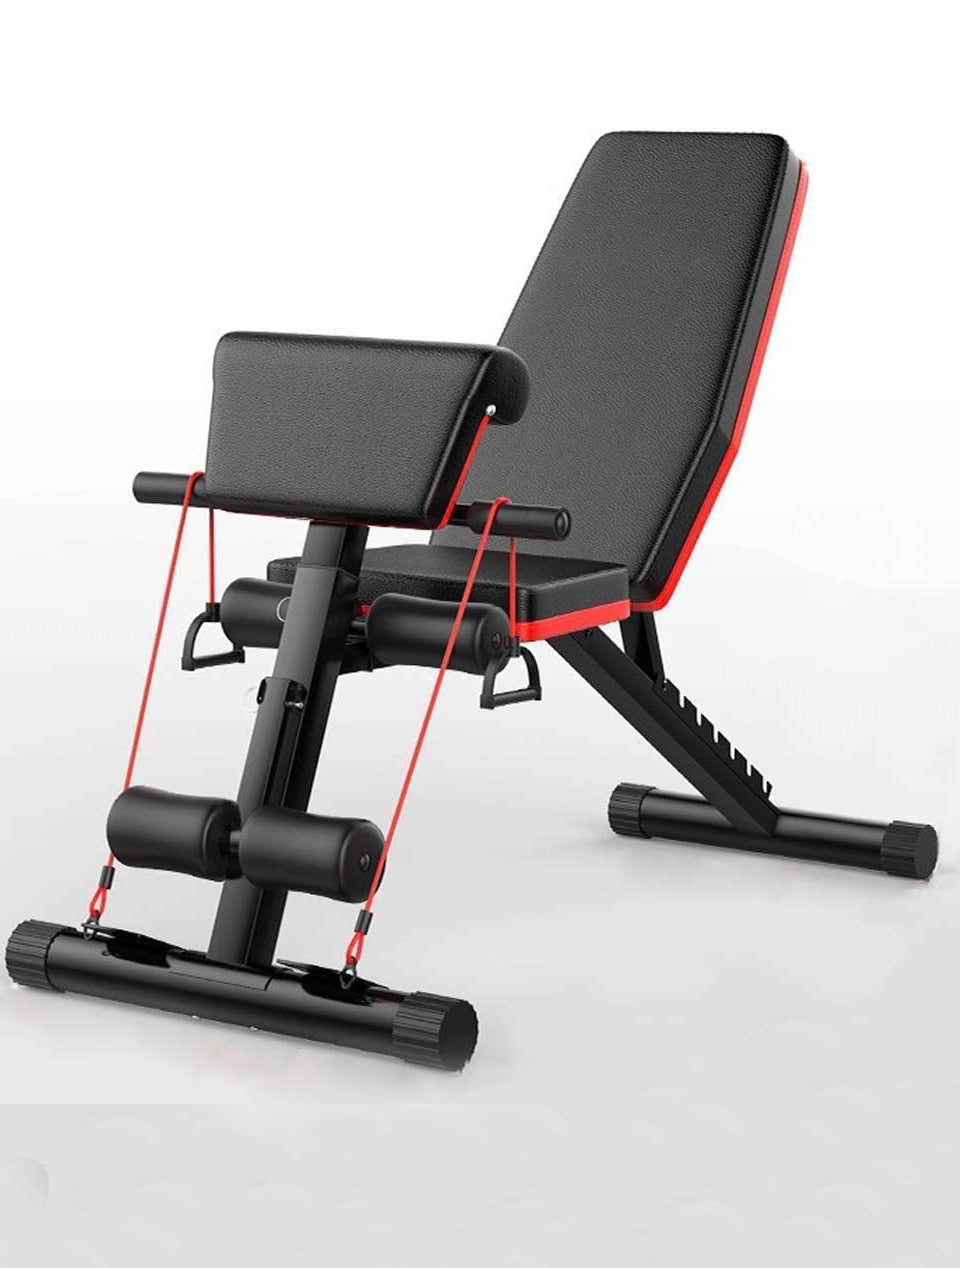 Multifunction Weight Bench, Incline Decline Foldable Weight Lifting Bench for Home 